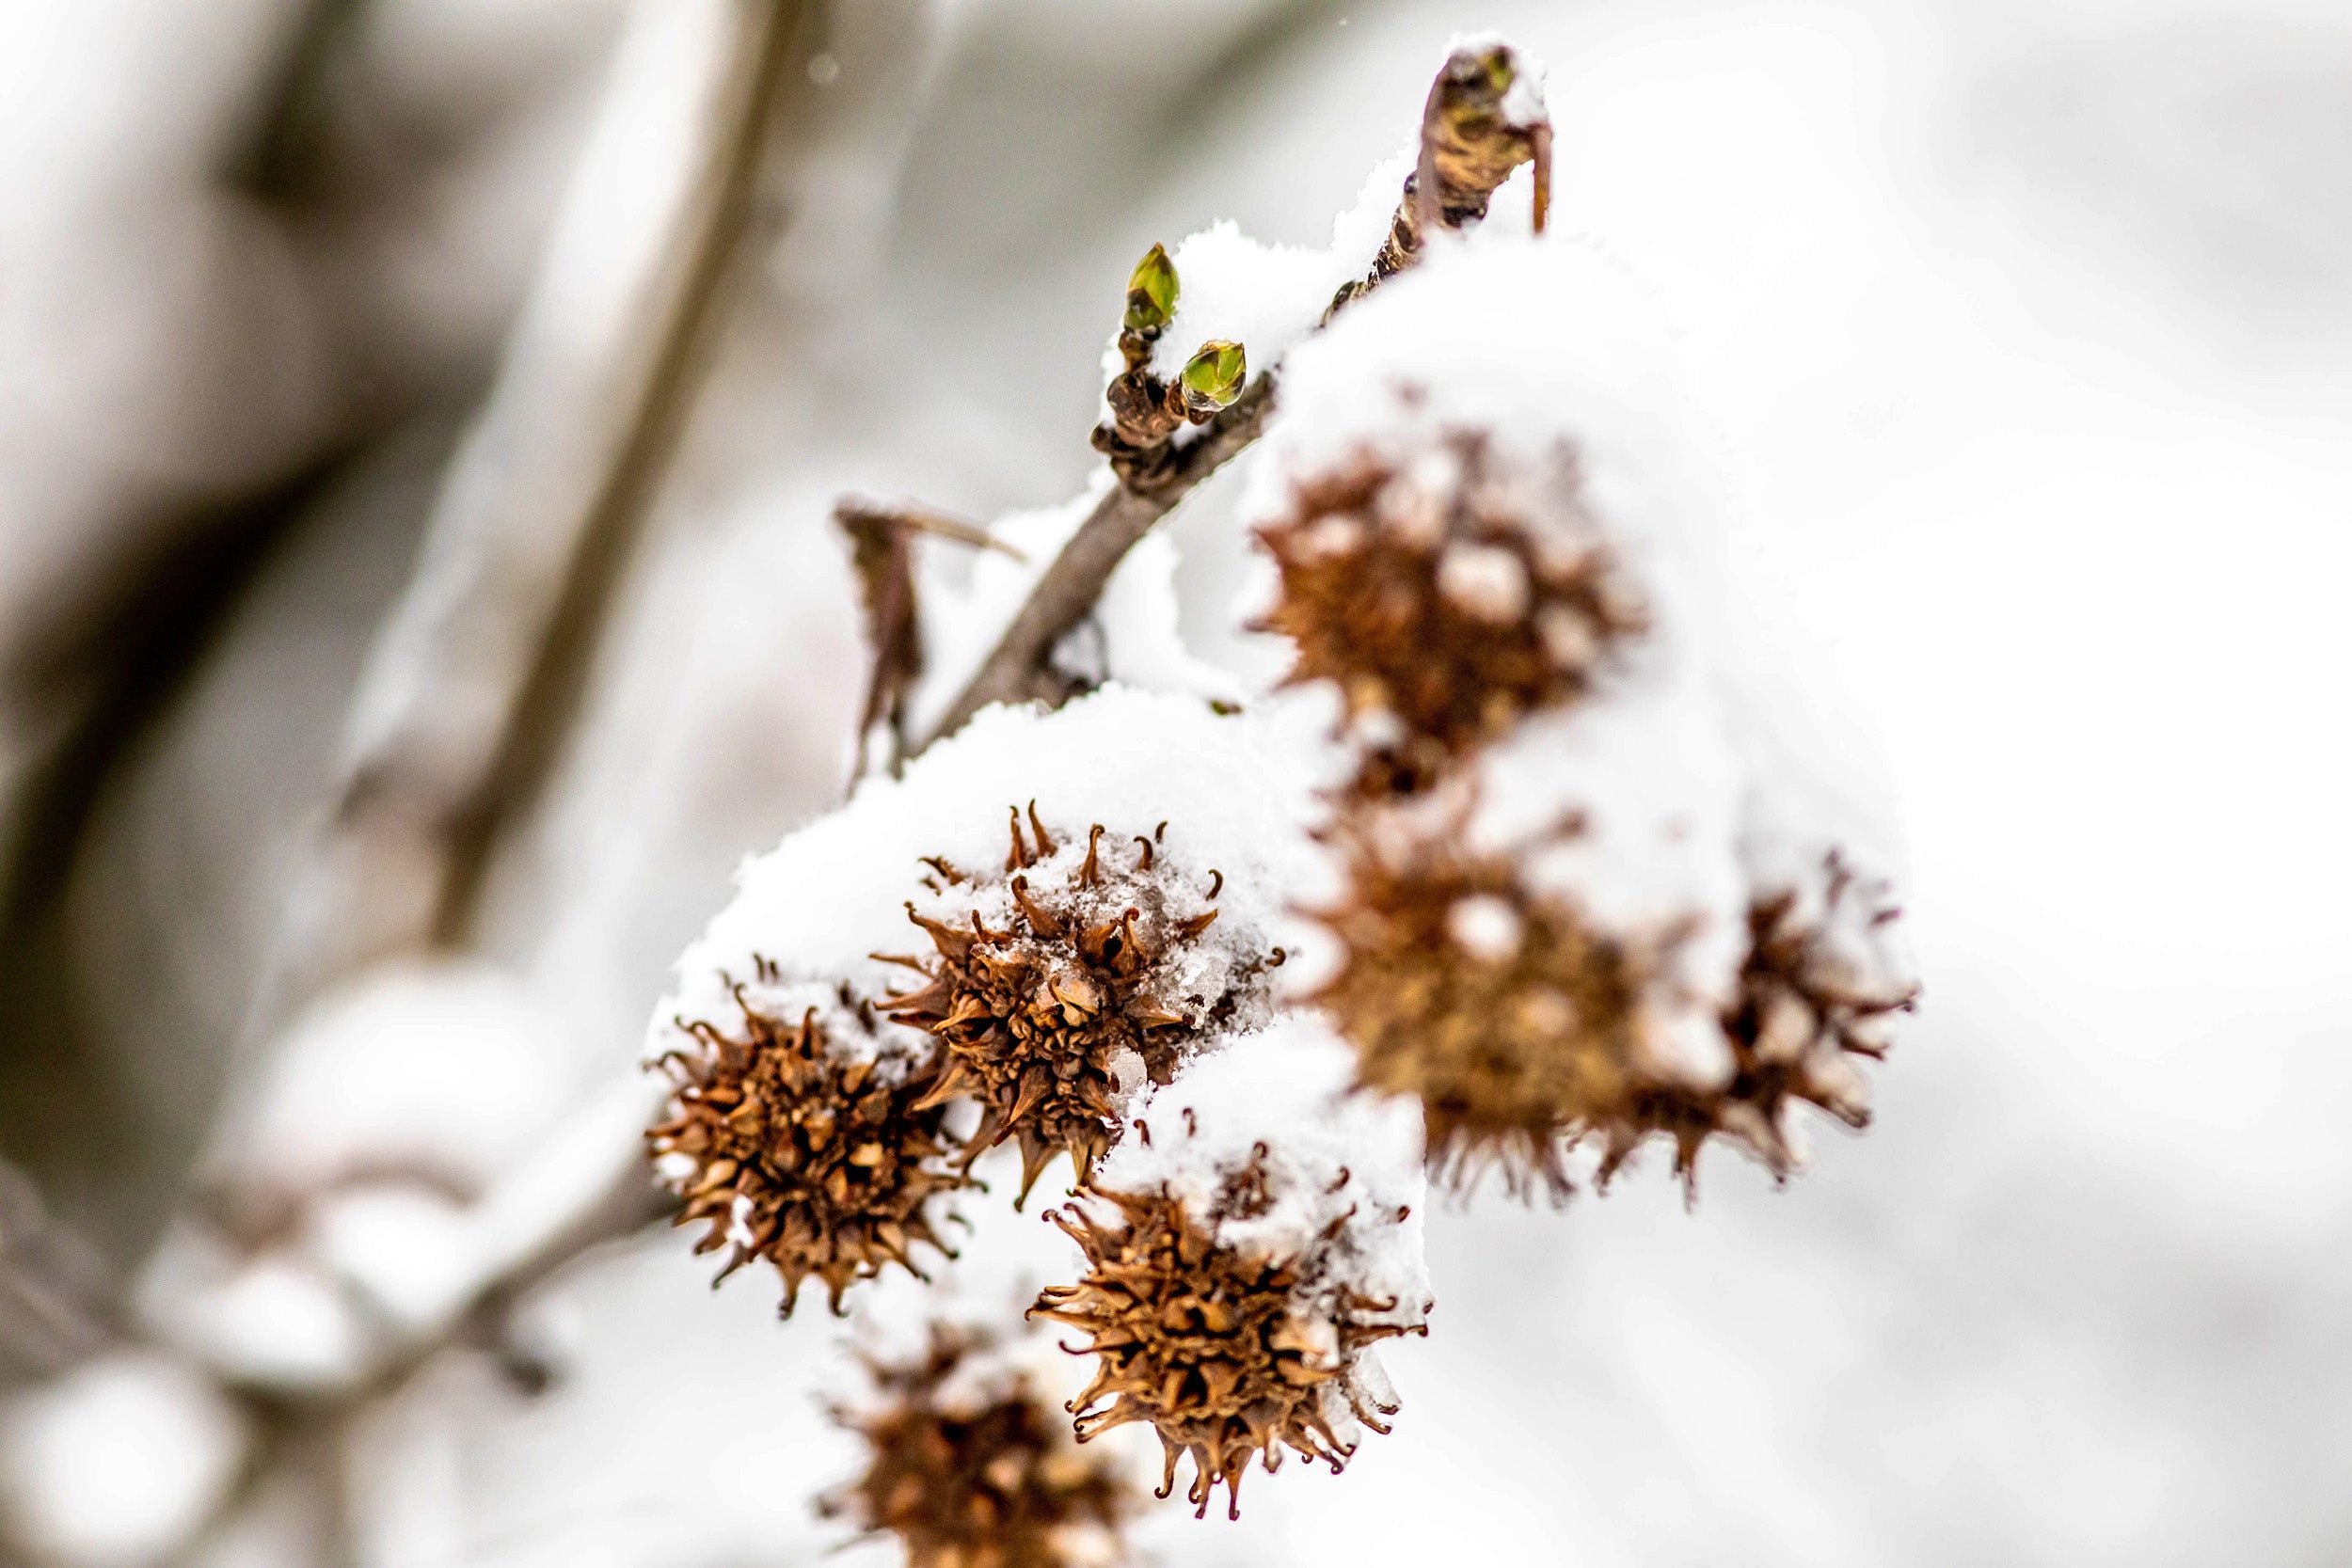 Snow lands on the fruits of a sweetgum tree.